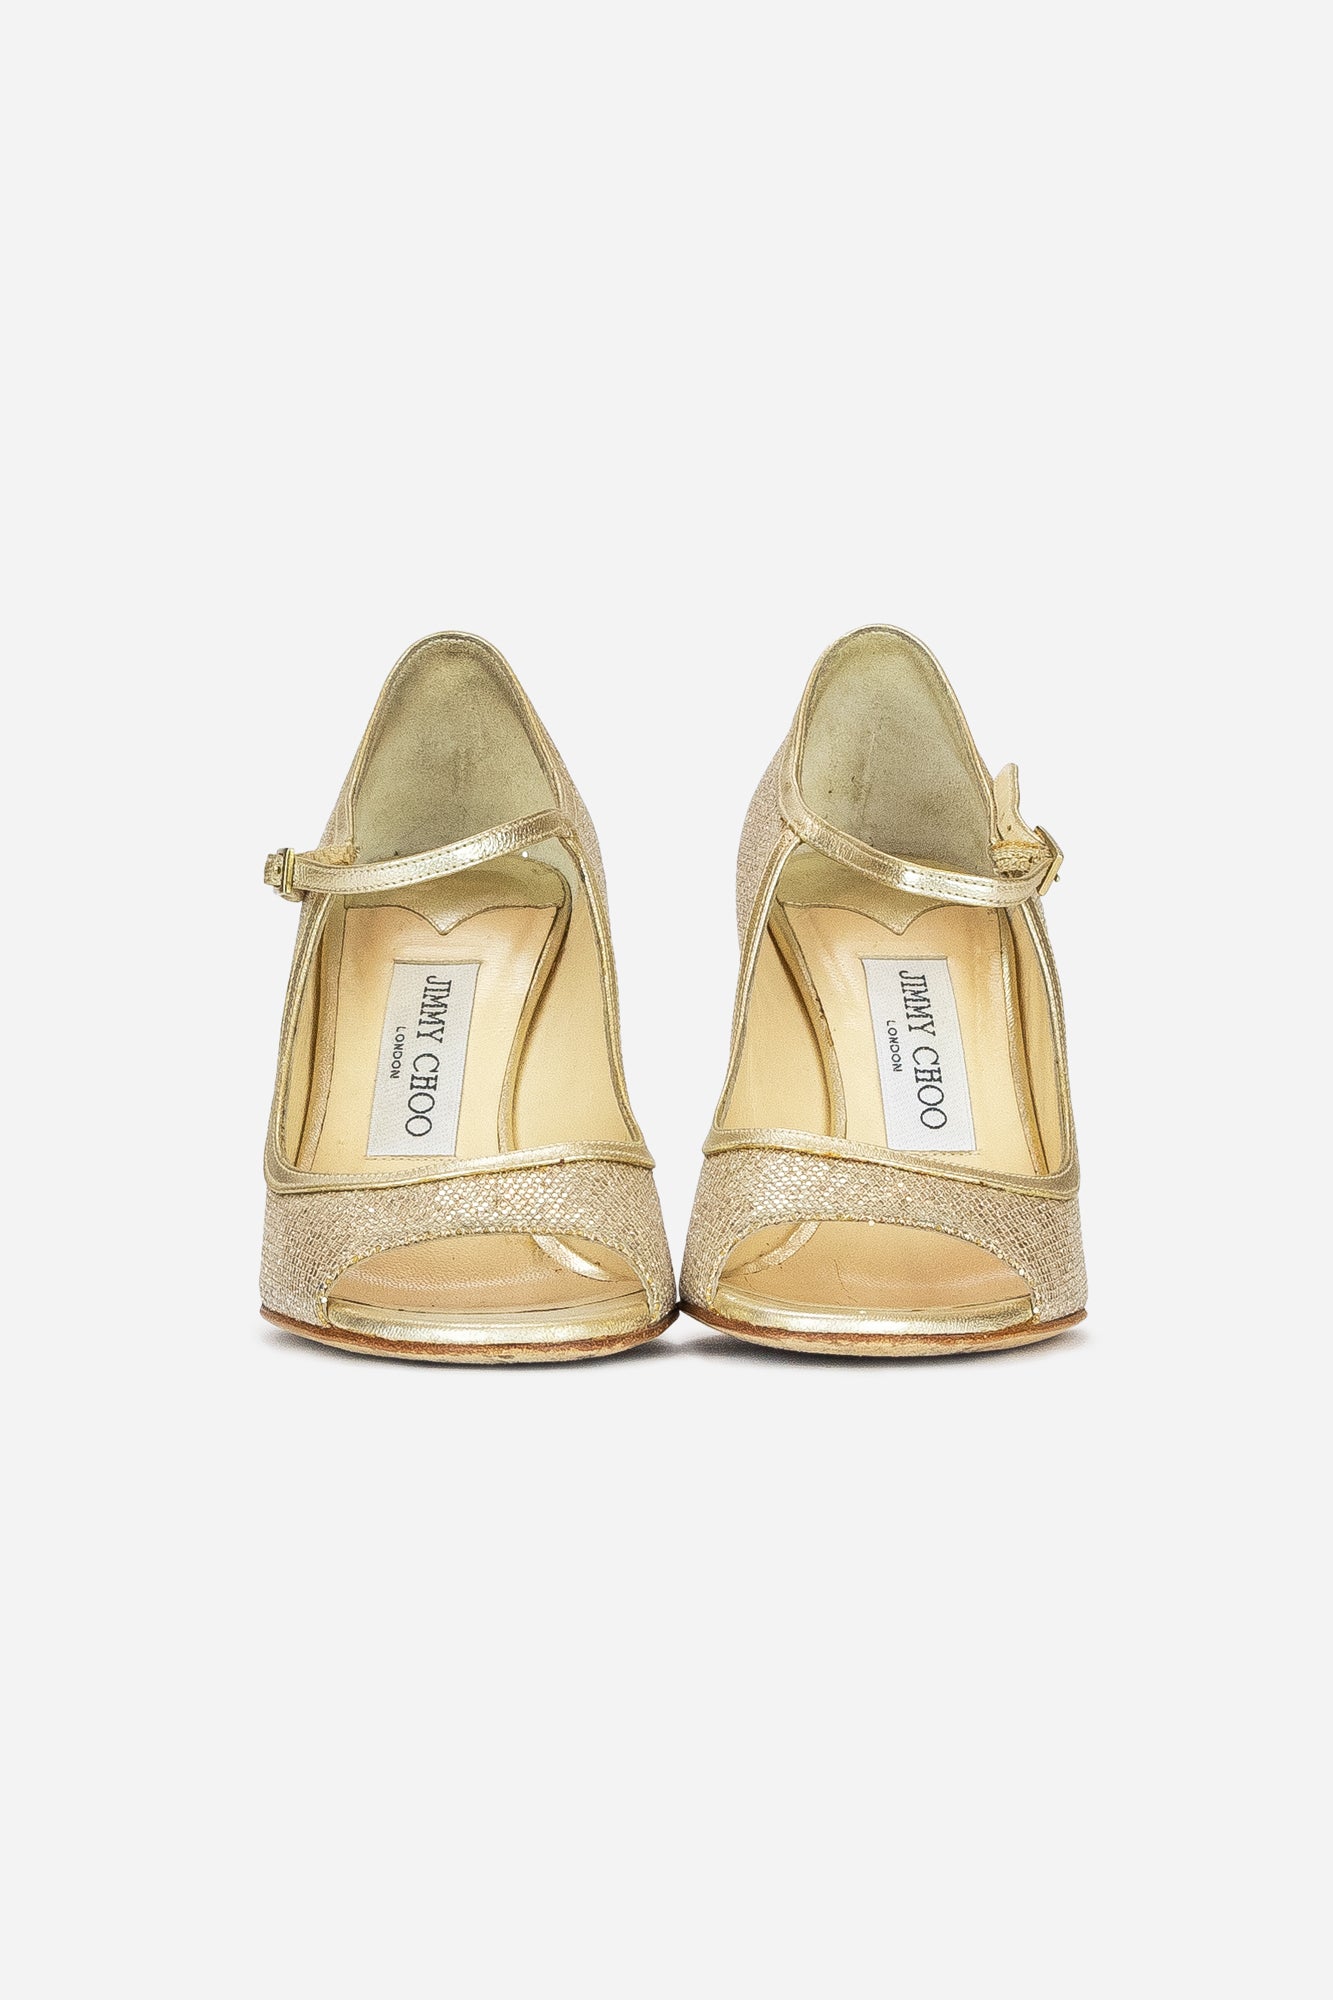 Gold Glitter Mary Jane Open Toe Pumps - So Over It Luxury Consignment